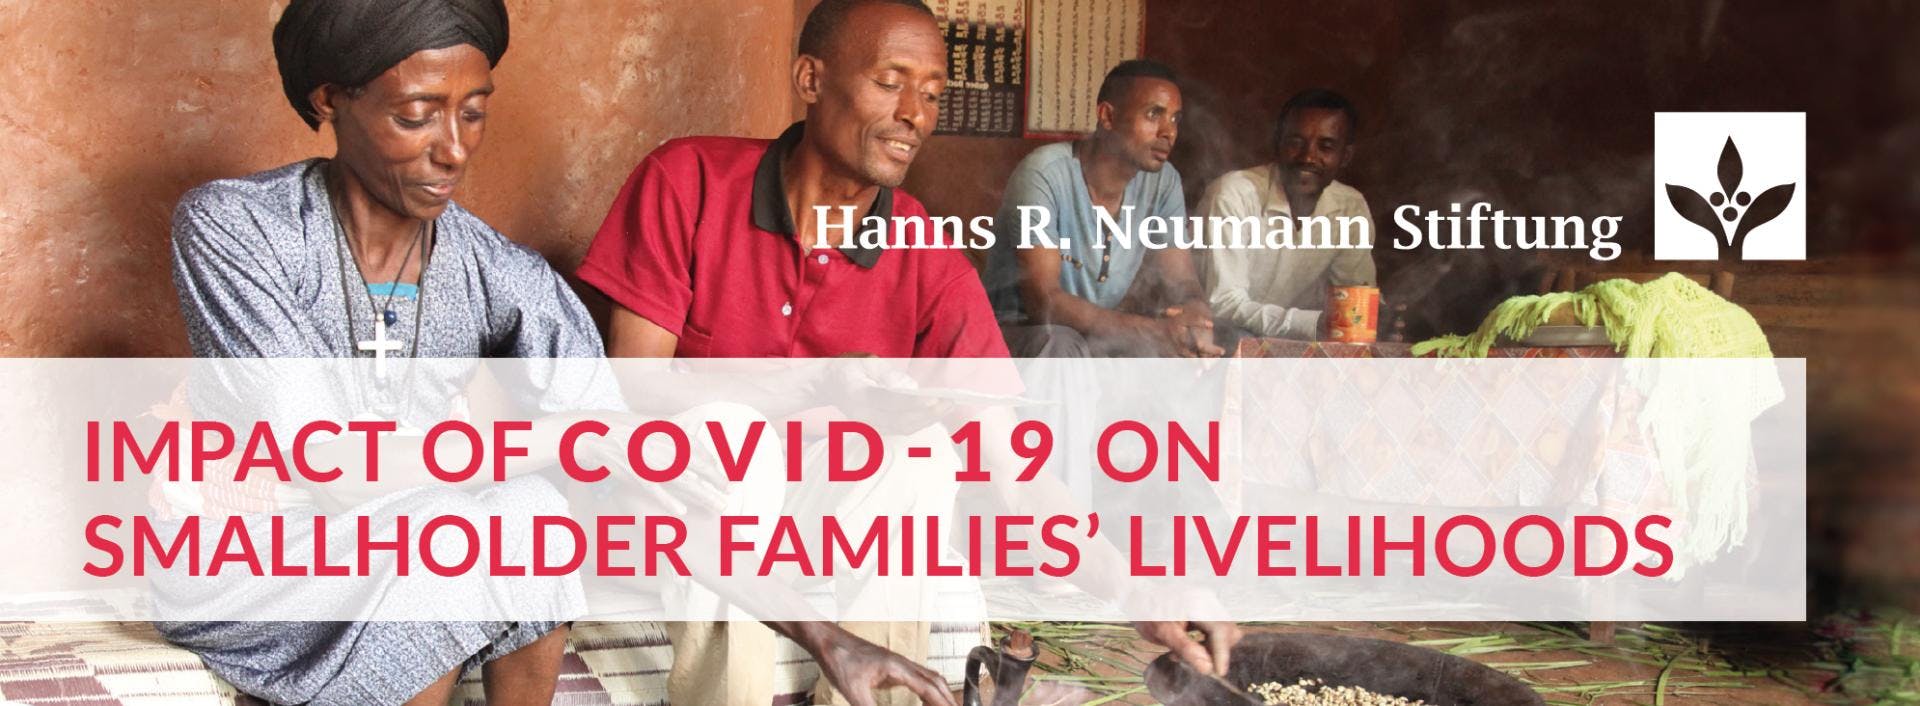 HRNS warns of COVID-19 long-term effects for smallholder families in coffee regions